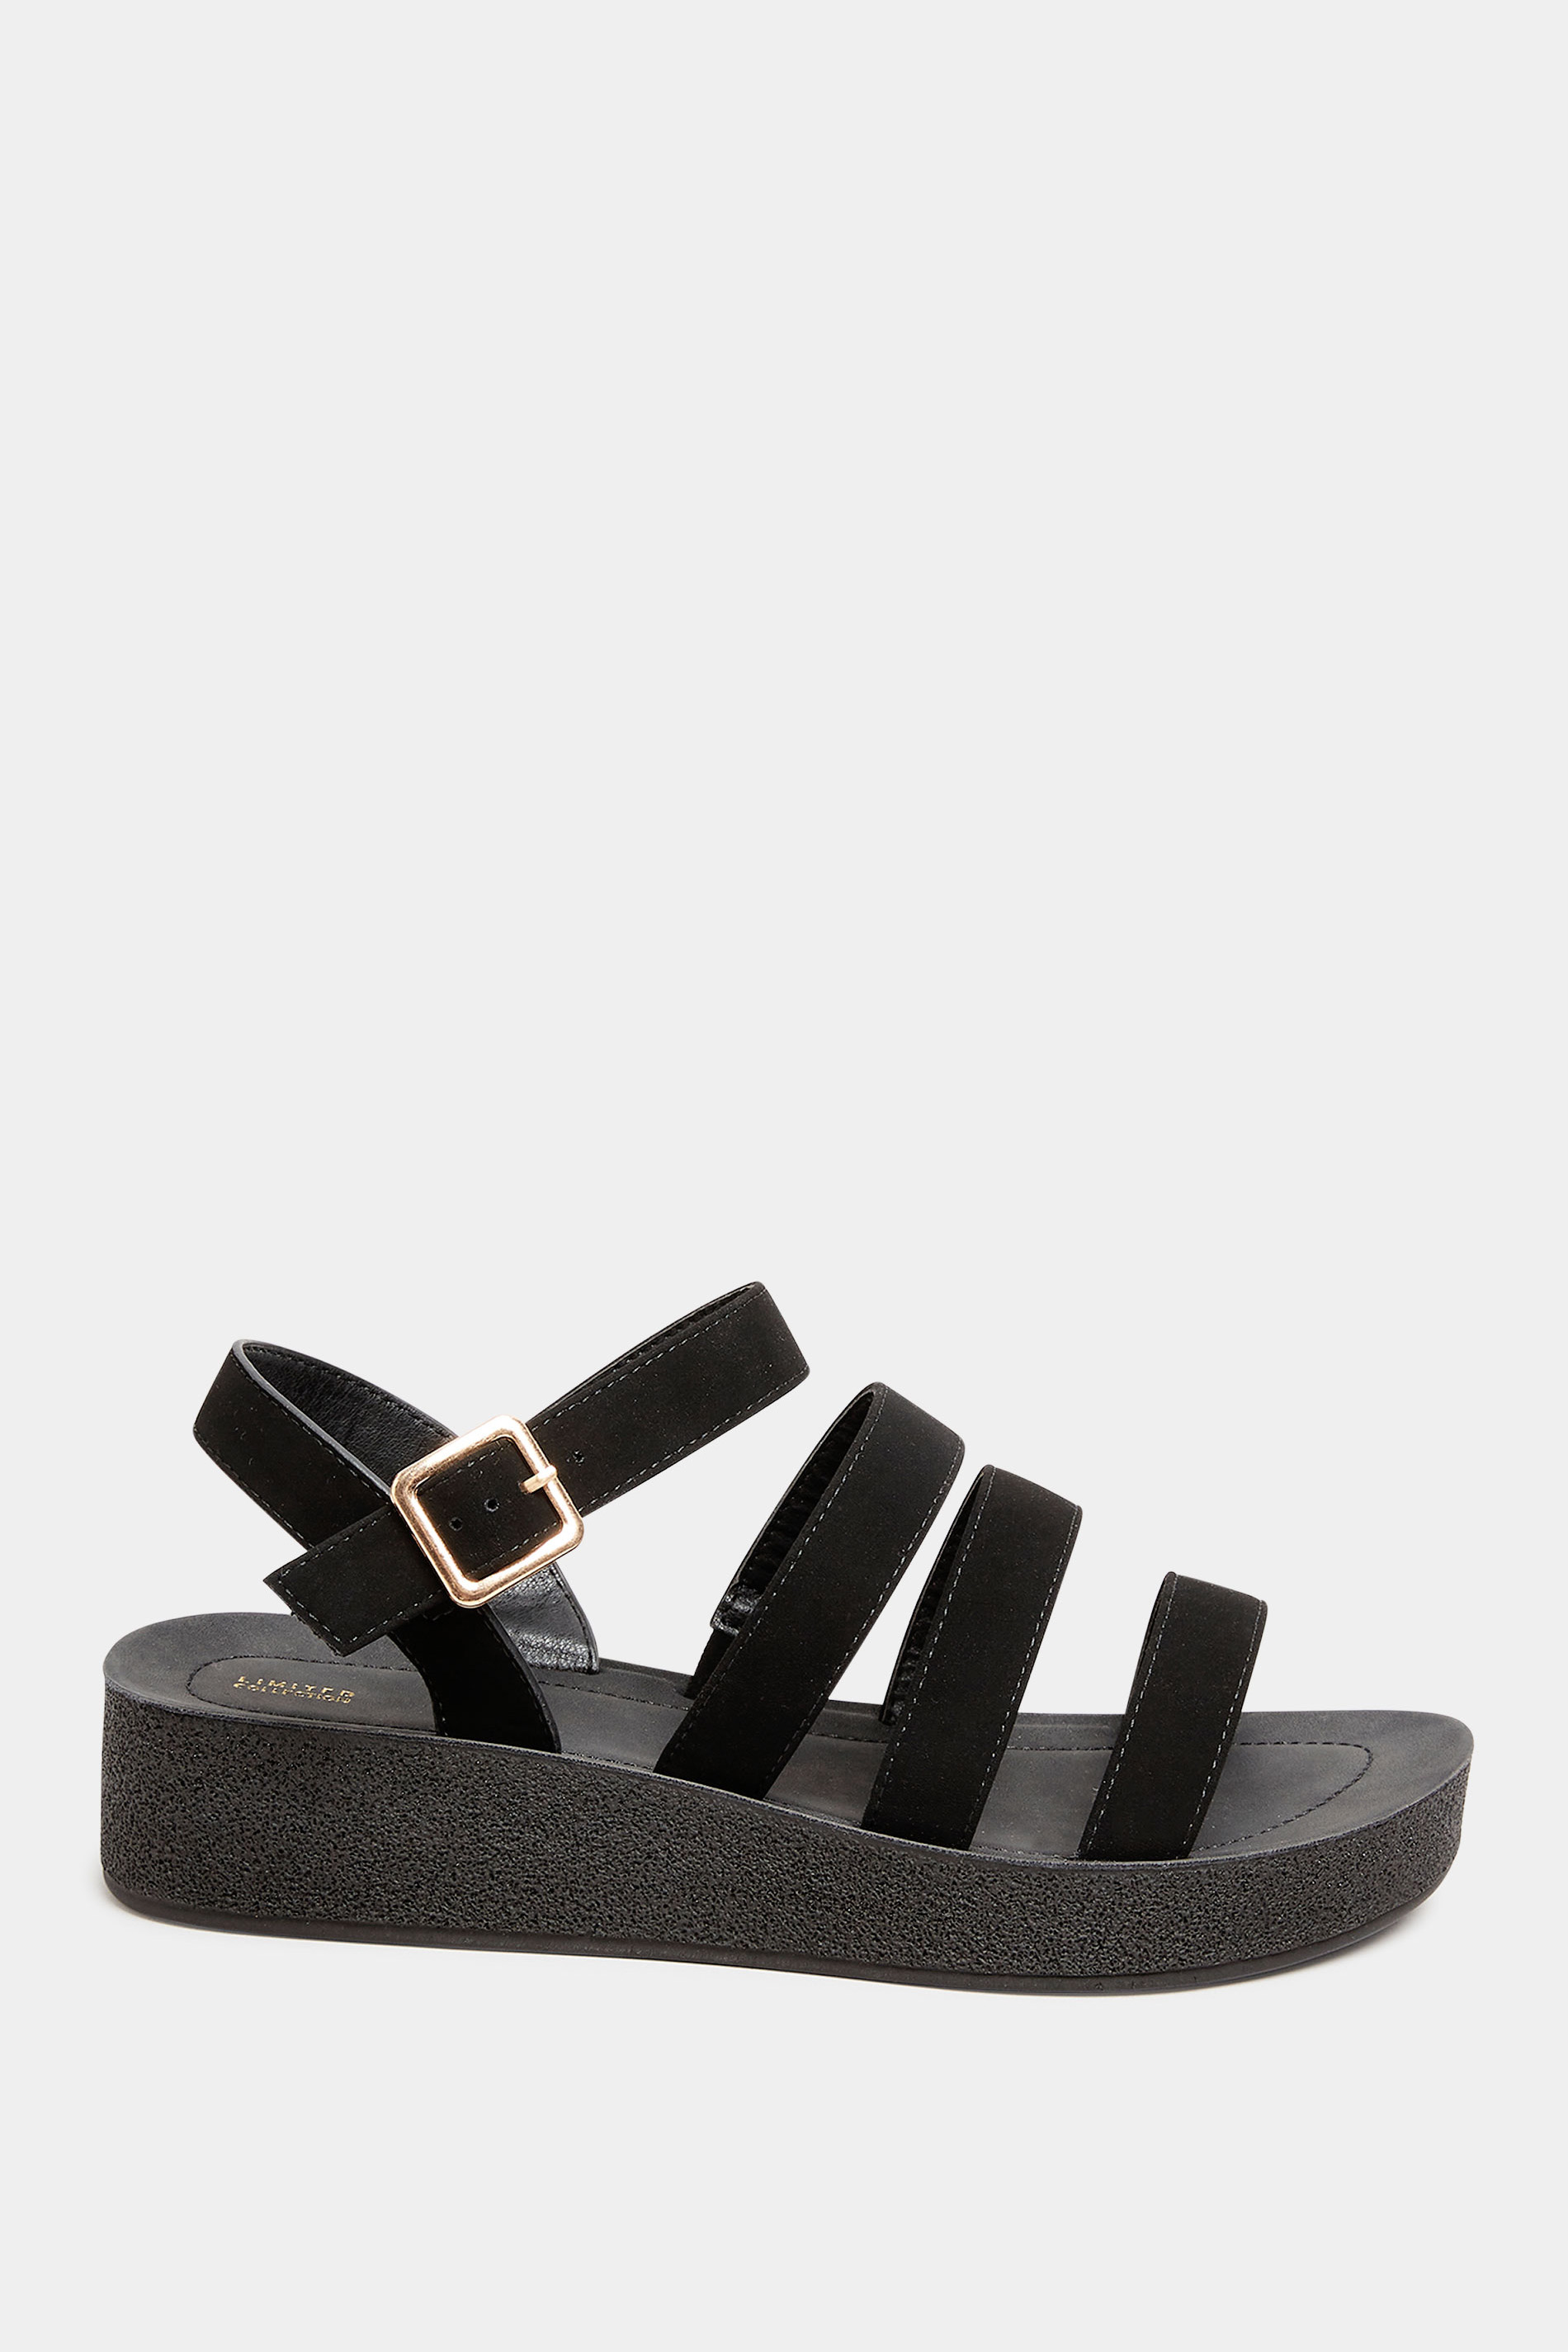 LIMITED COLLECTION Black Multi Strap Sporty Platform Sandal In Extra Wide Fit 3